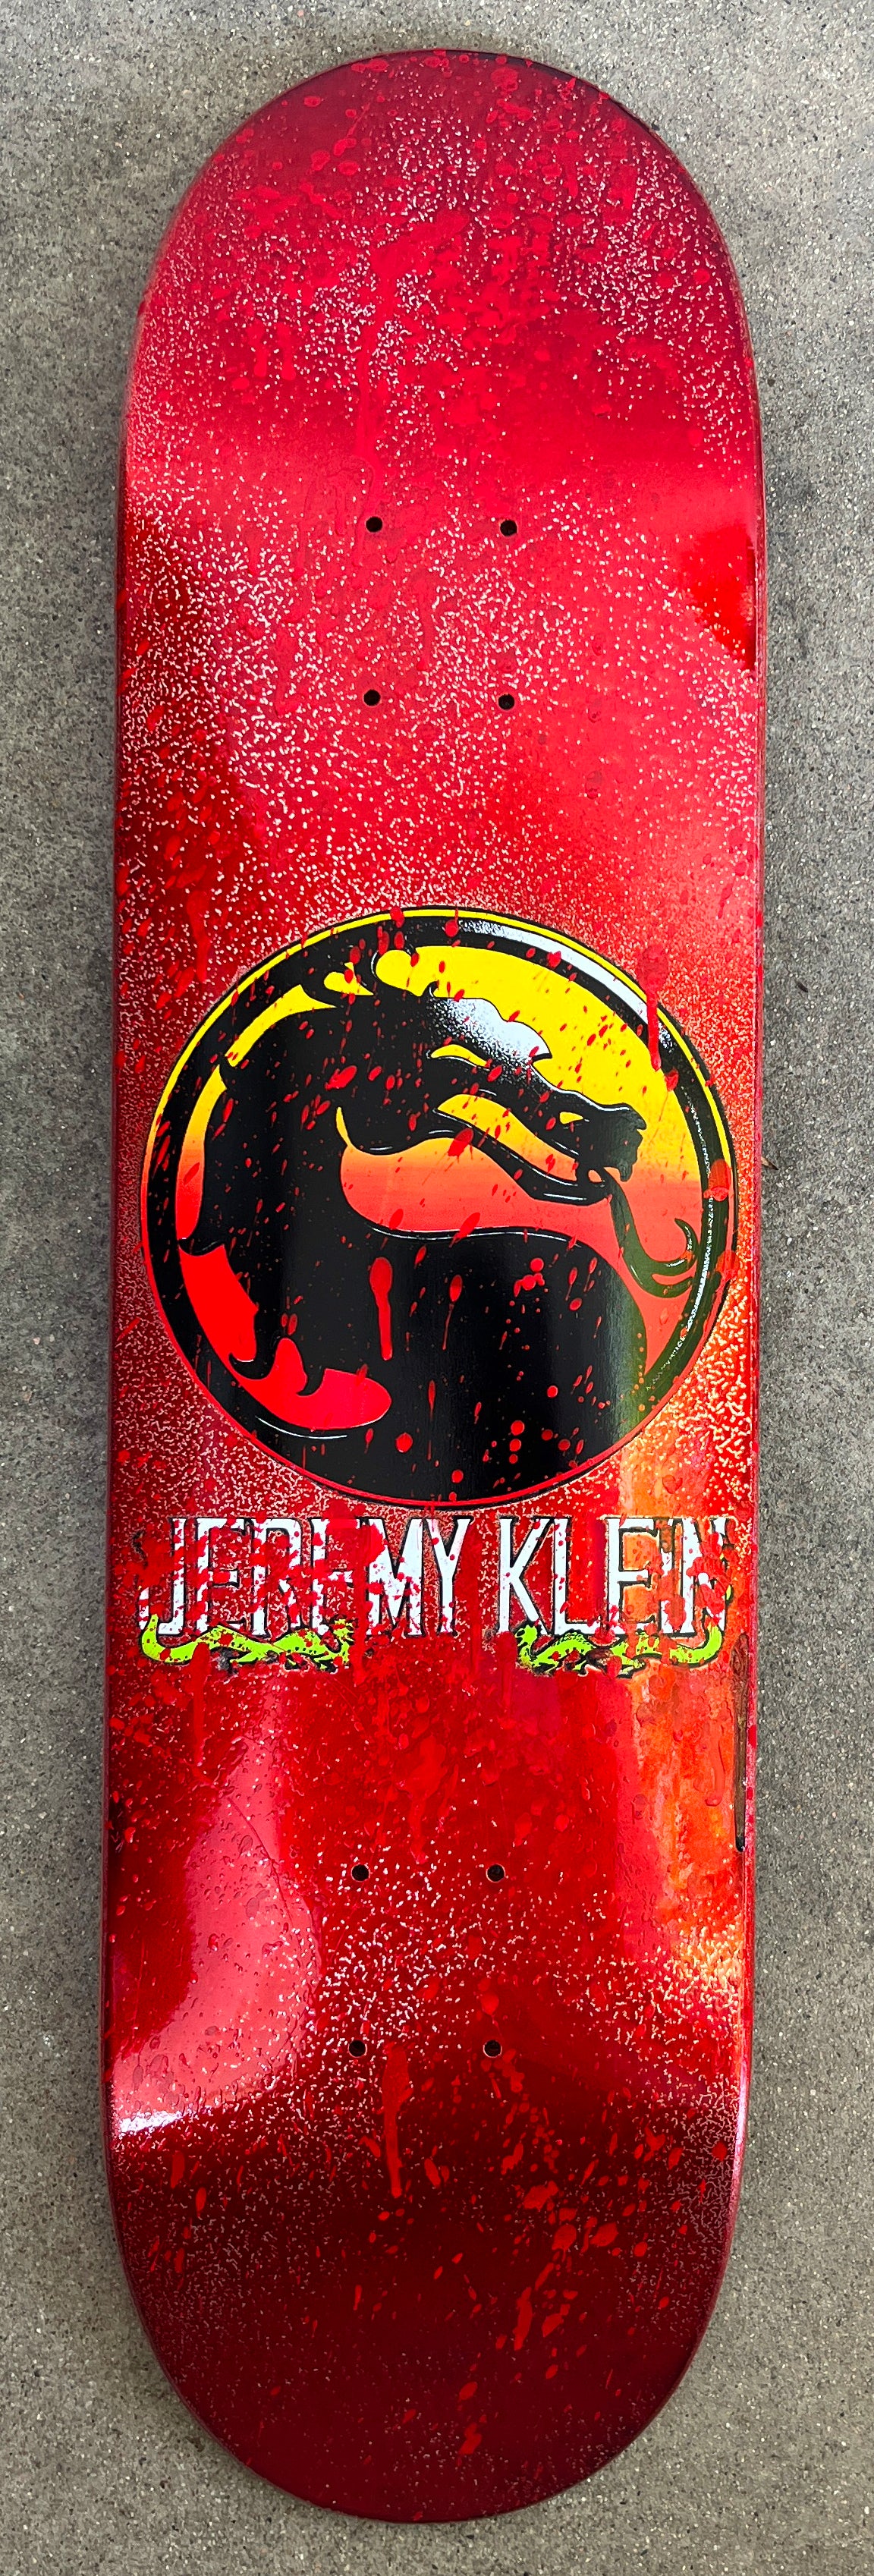 1 of 1 SIGNED jeremy klein dragon 8.0 X 31.75 HAND SCREENED CHROME BLOOD